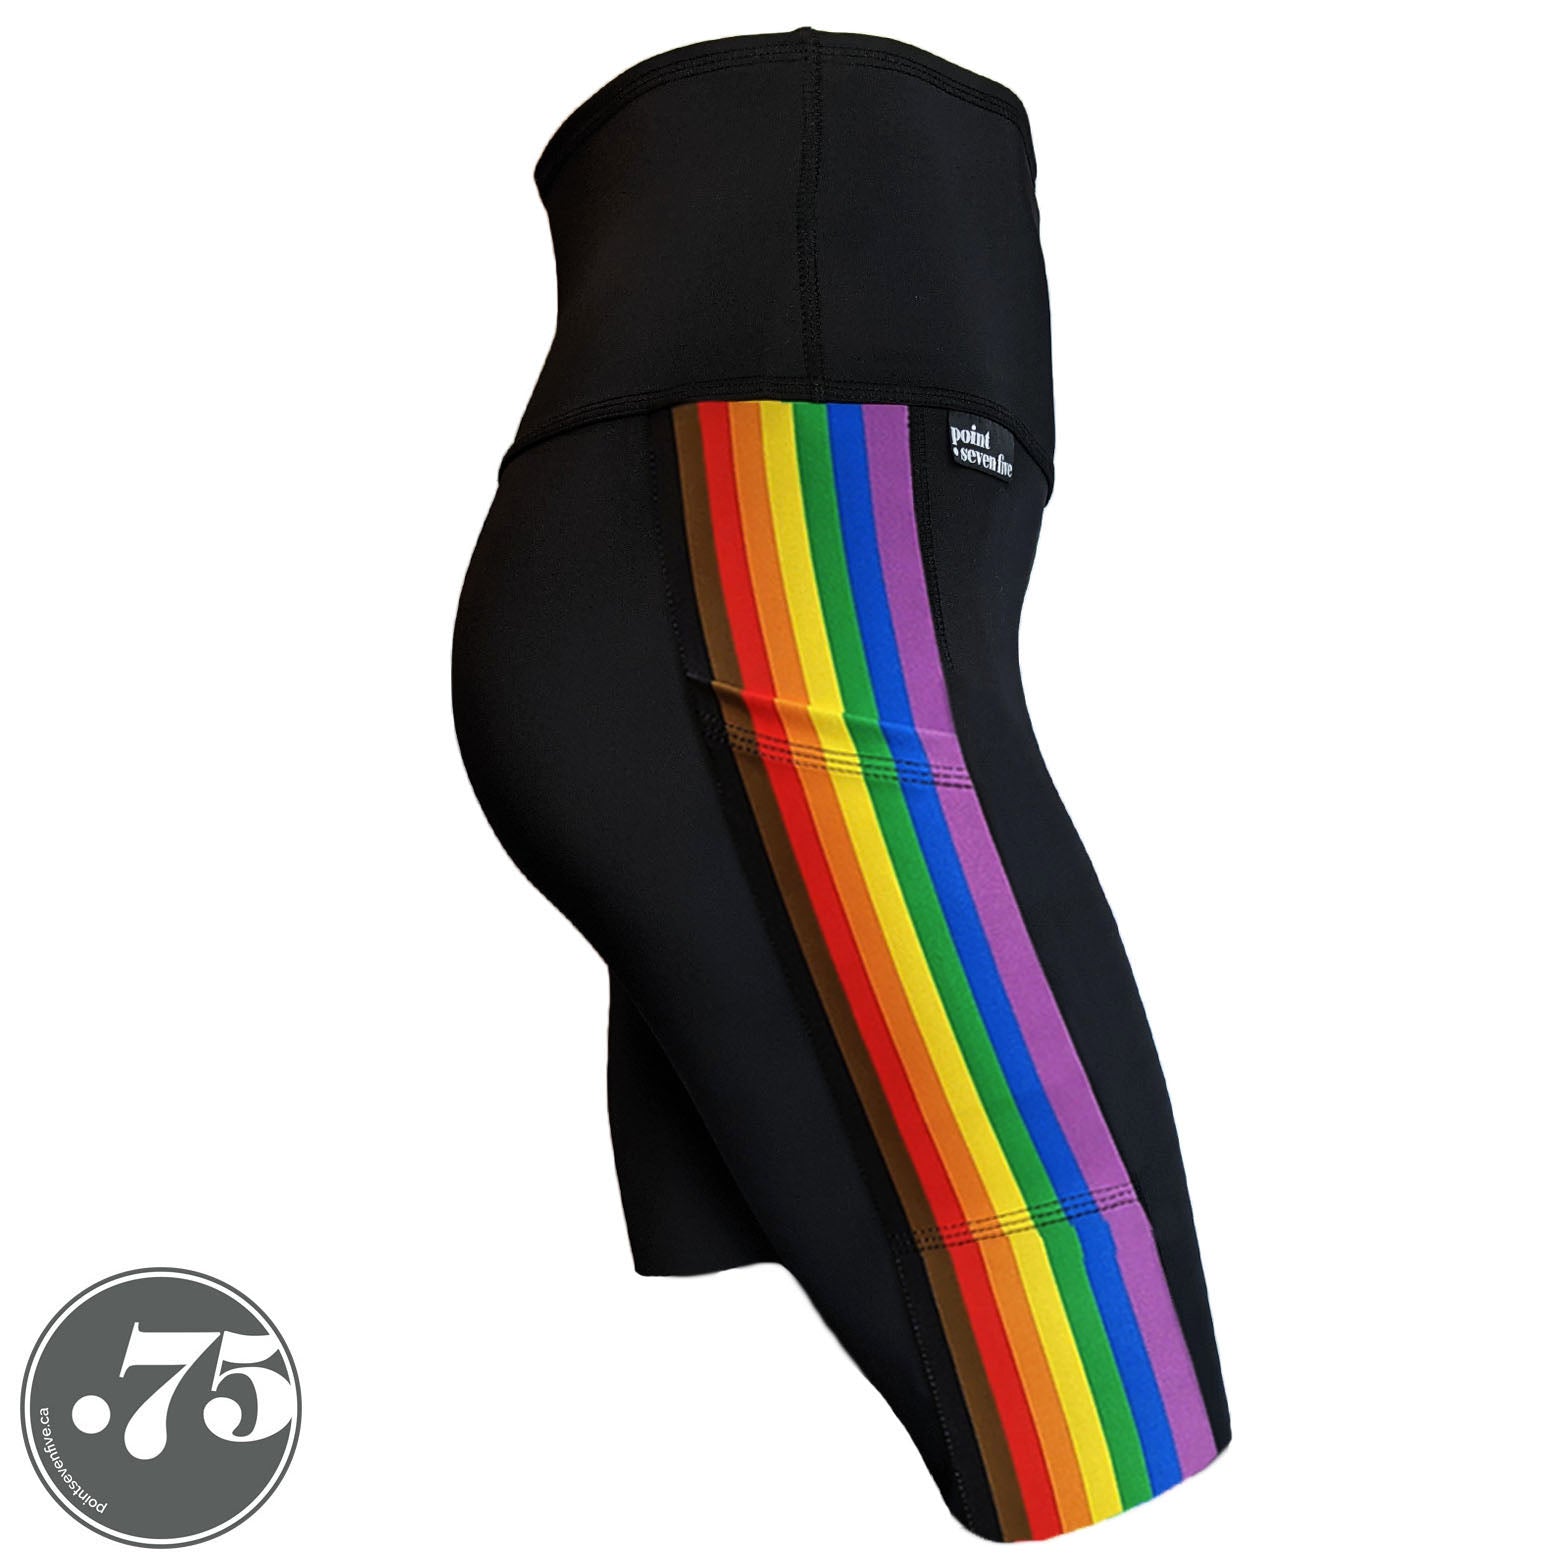 A pair of black spandex knee length shorts on a mannequin, the leggings have a 3.5” wide stripe down the side that has a printed fabric with the stripes of the Philadelphia Pride Flag vertically, the stripes are black, brown, red, orange, yellow, green, blue & purple. 